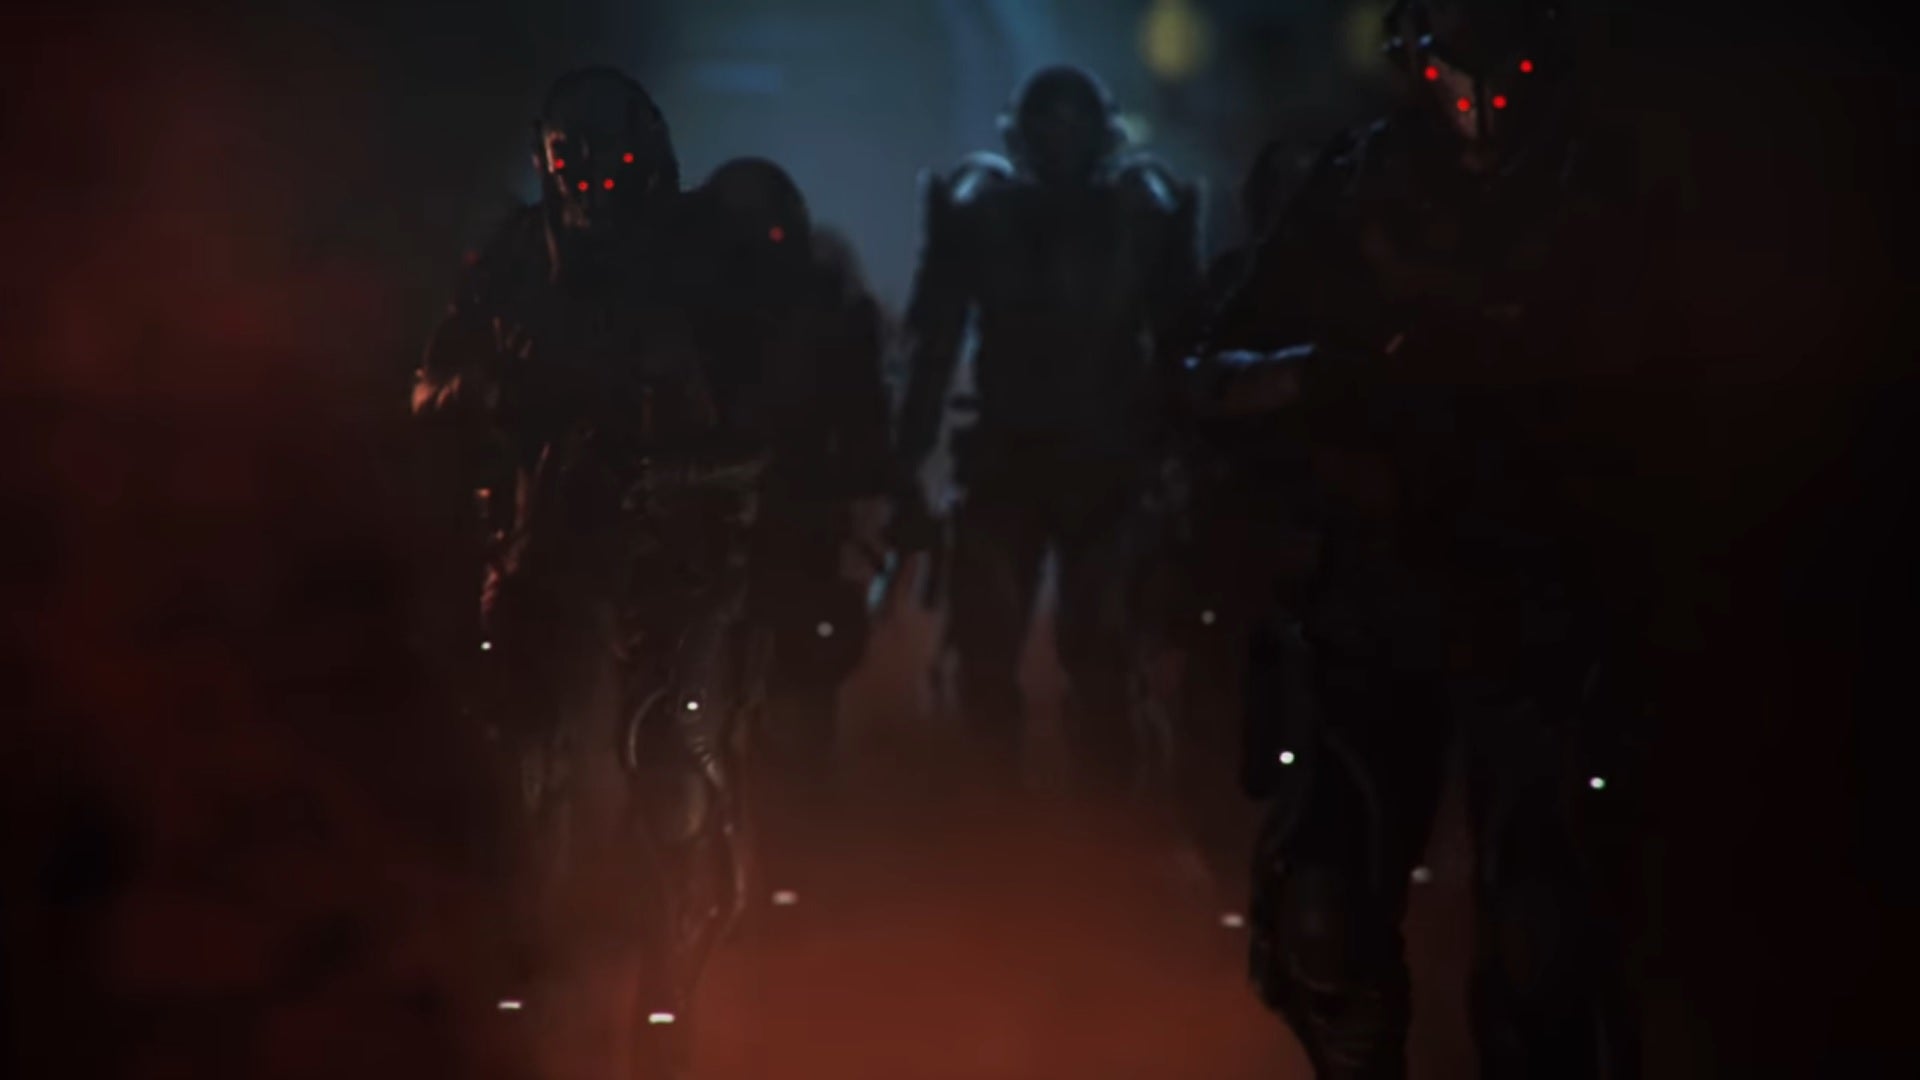 Entity soldiers marching forward.